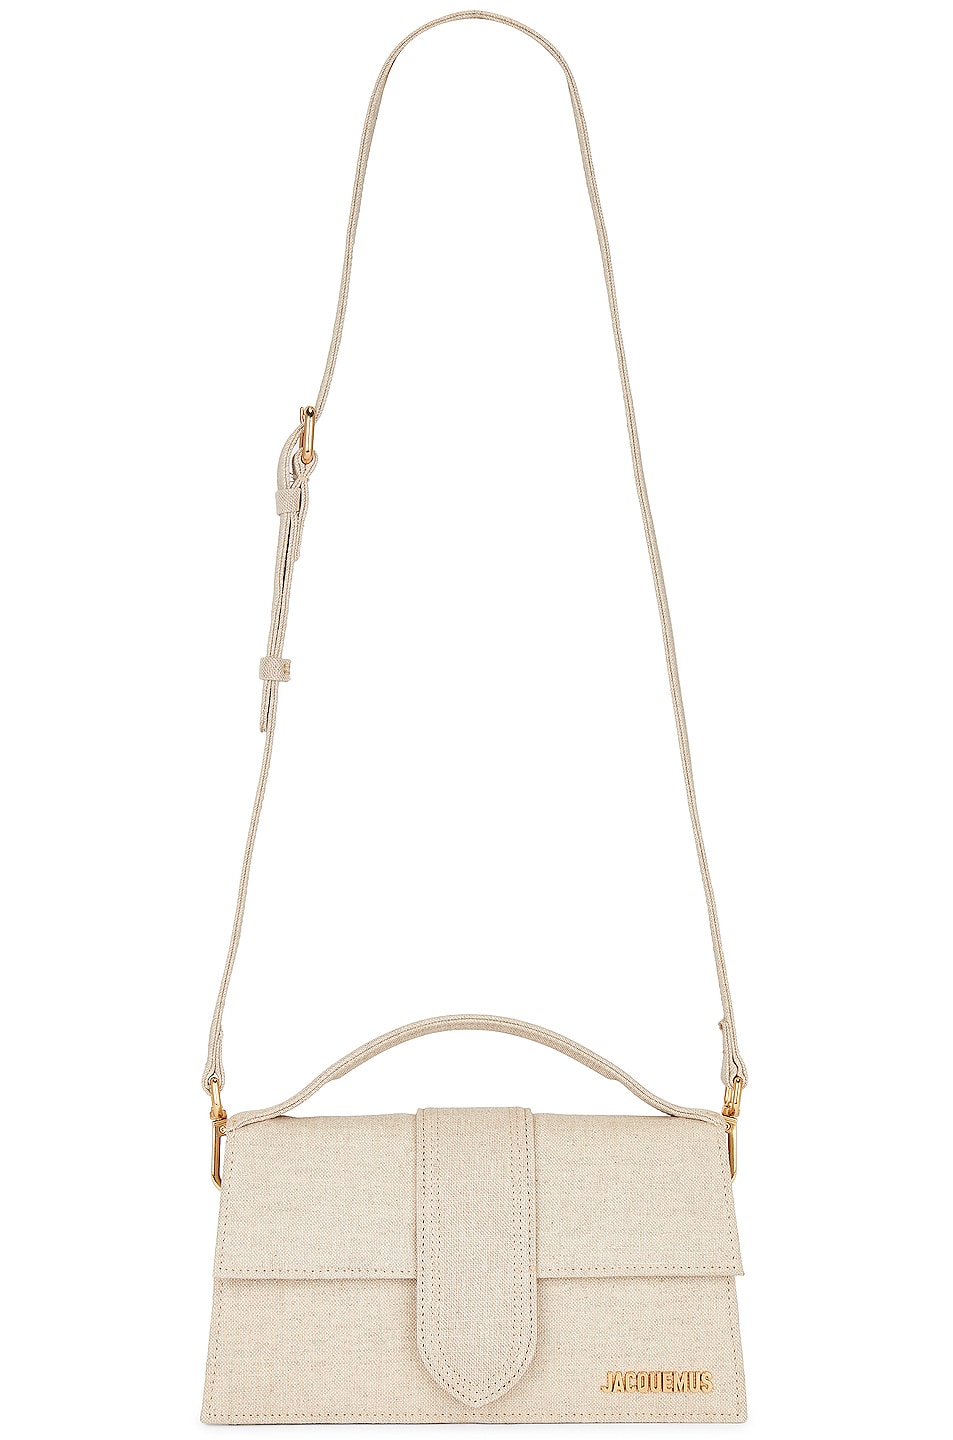 JACQUEMUS Le Grand Bambino Bag in Beige